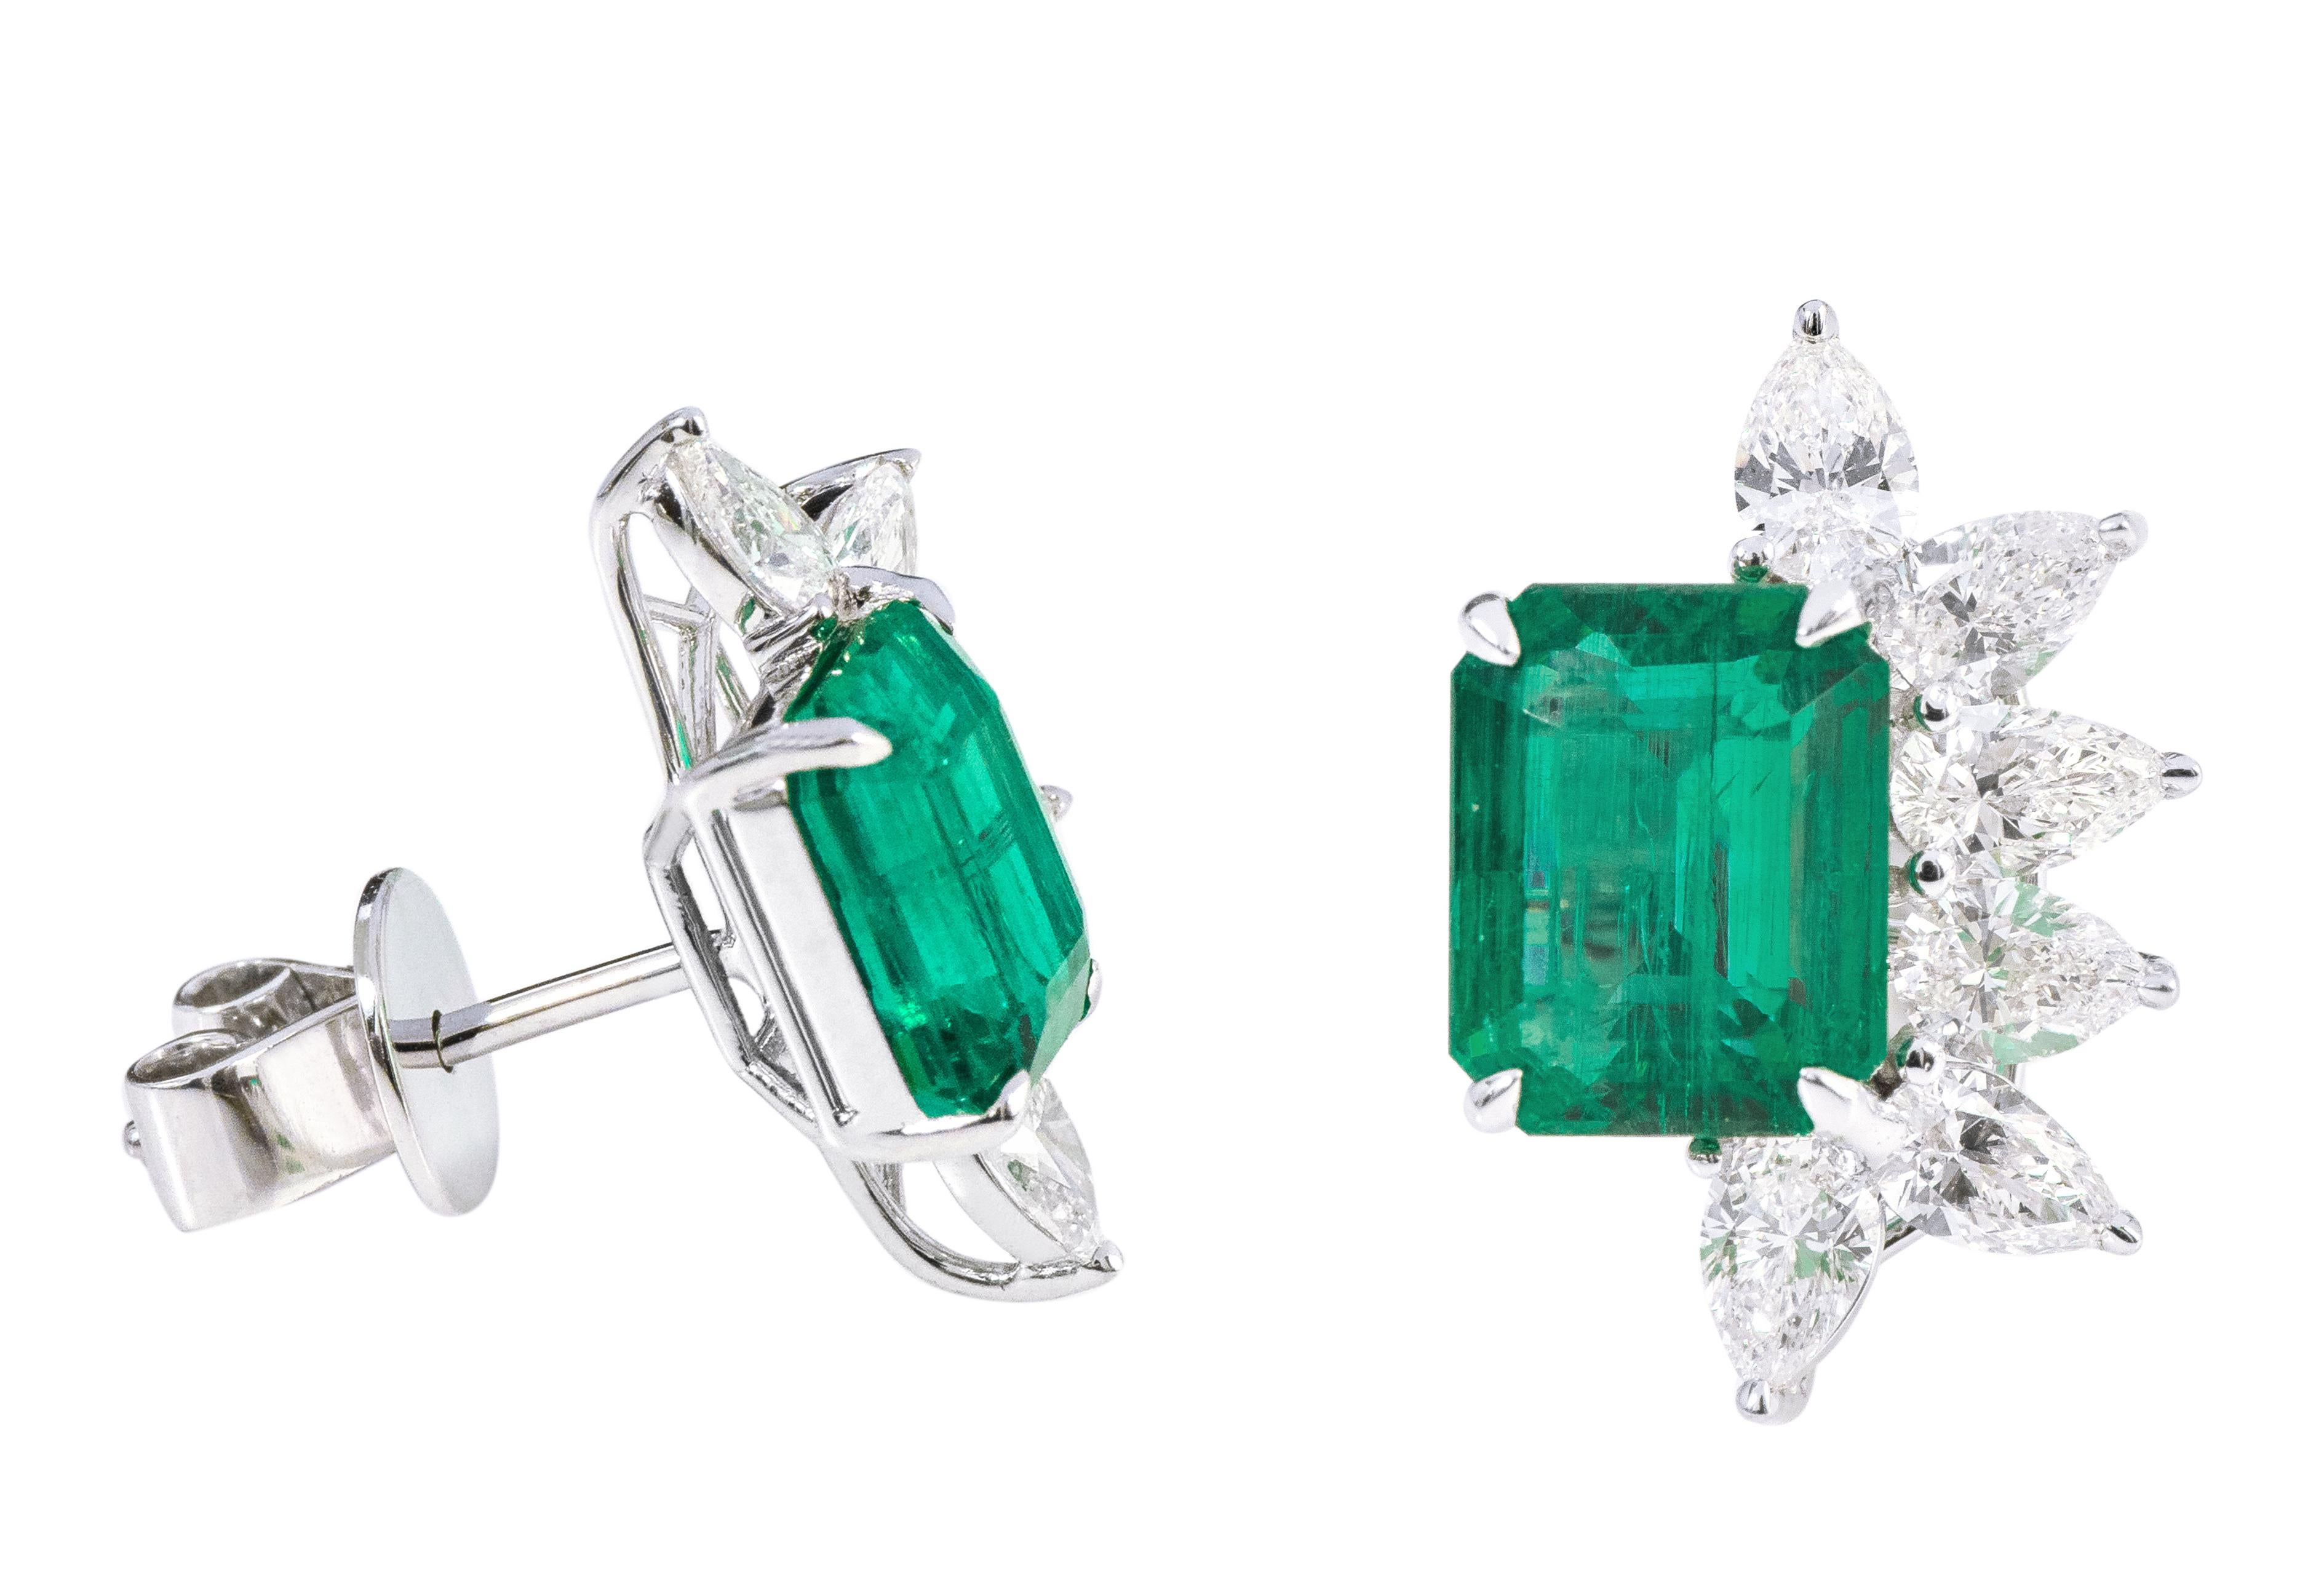 18 Karat White Gold 5.07 Carat Natural Emerald and Diamond Modulation Stud Earrings

This magnificent imperial green emerald and diamond earring is sensational. The exquisite solitaire emerald cut emerald with a leveled up and down solitaire